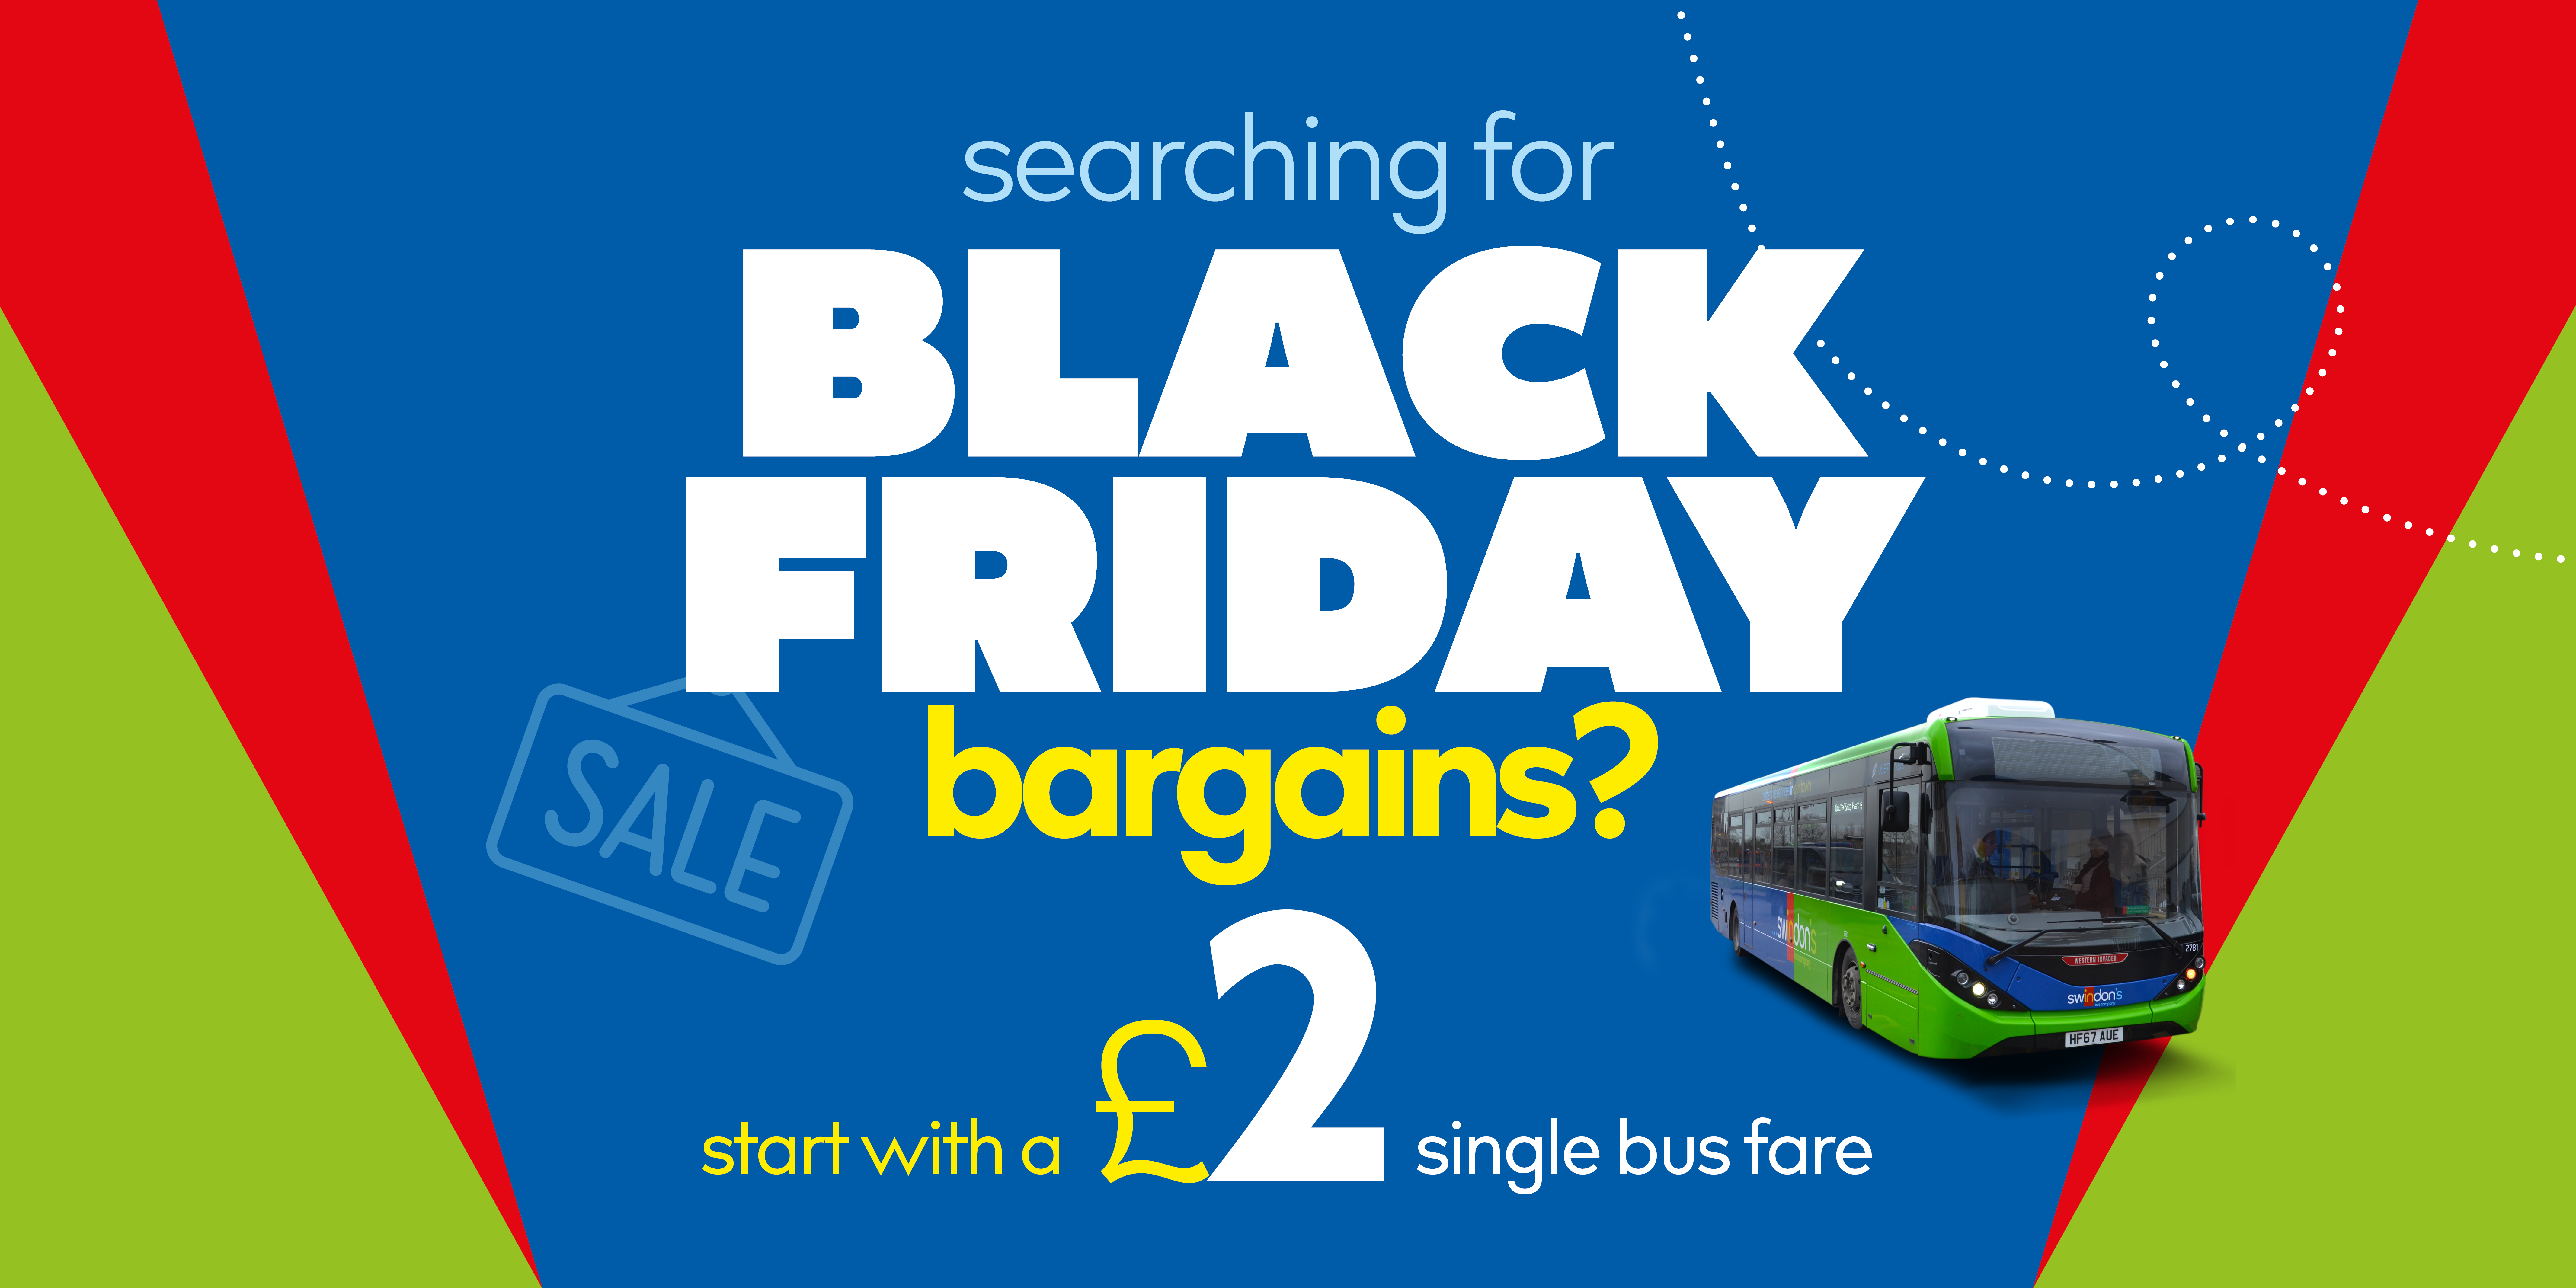 travel for £2 this Black Friday image with a Swindon's Bus Company bus